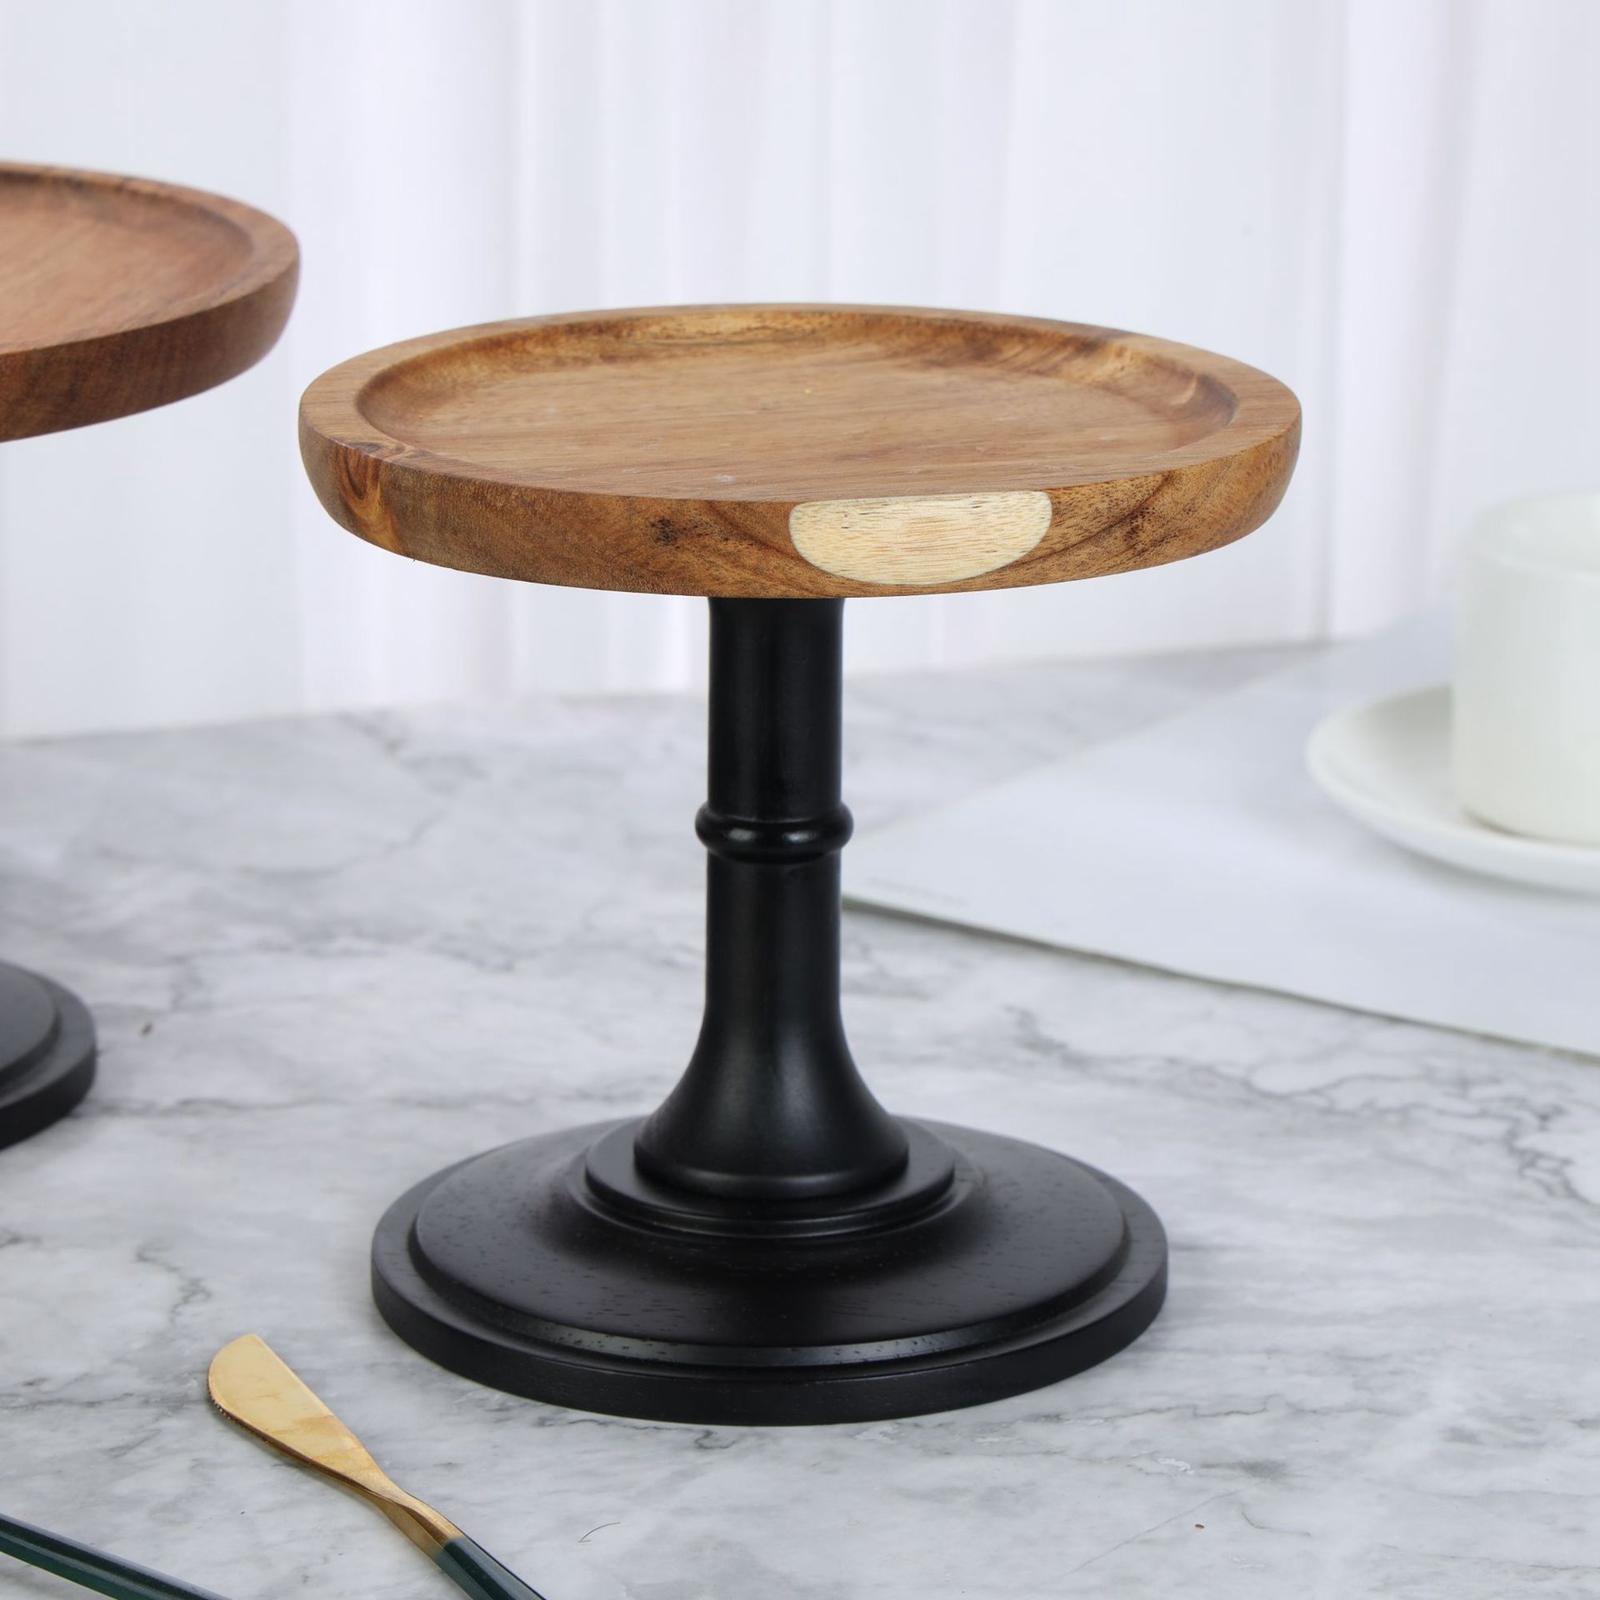 Wood Cake Stand Round Household Kitchen Tool for Sushi Dessert Fruit Snack